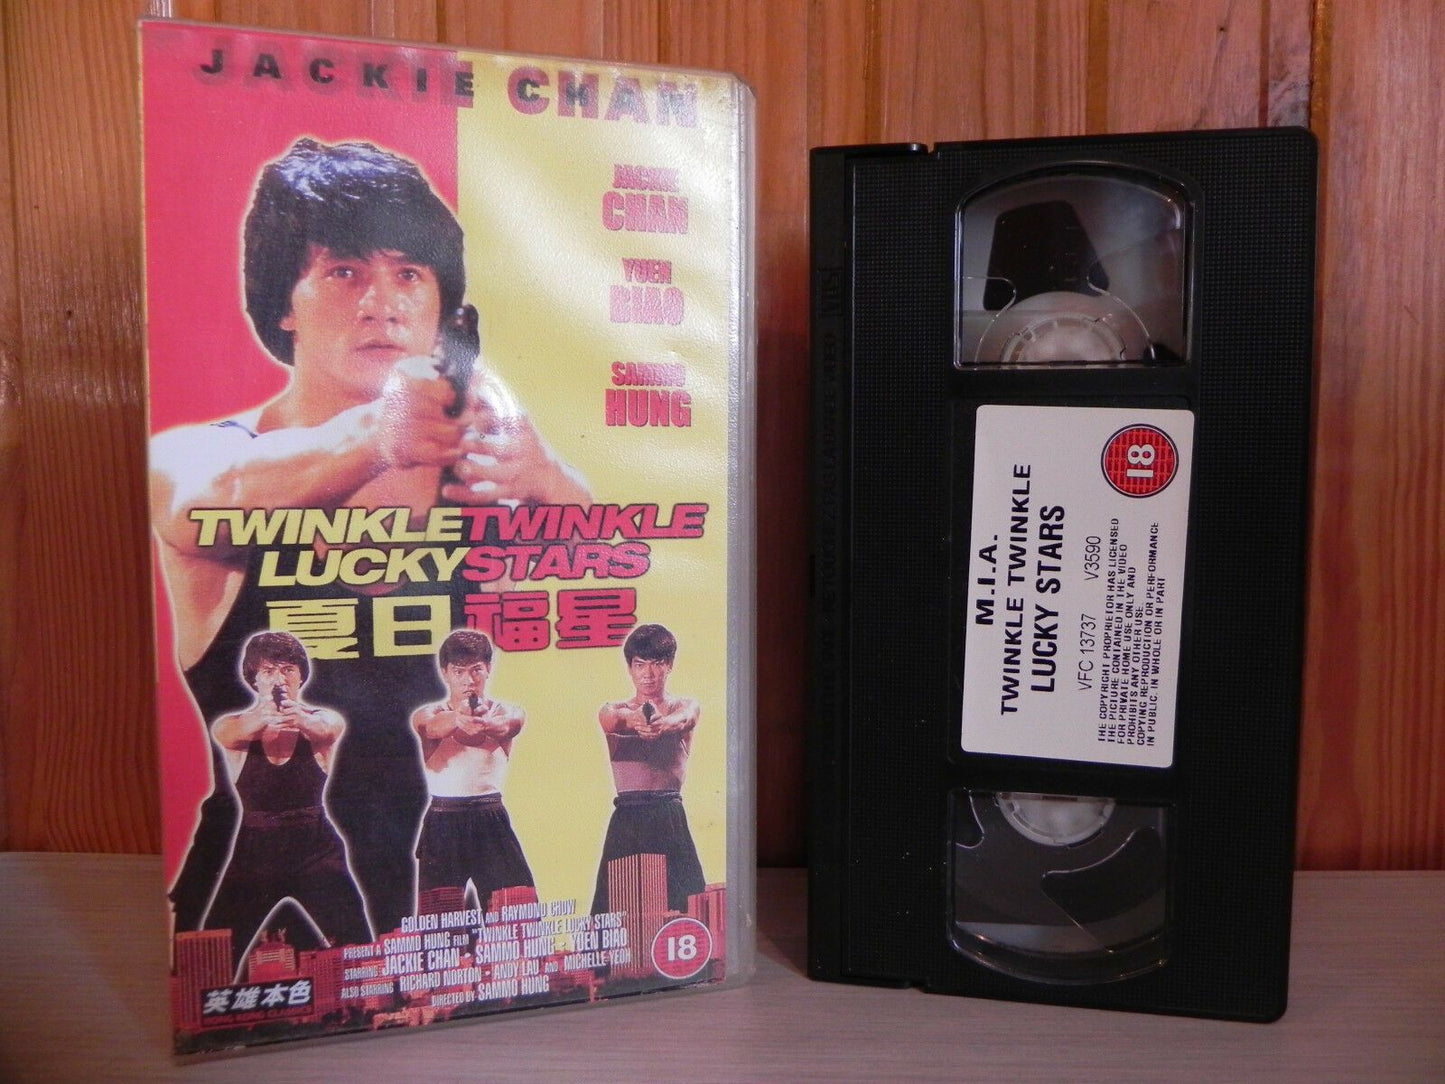 Twinkle Twinkle Lucky Stars - Jackie Chan - Sammo Hung - Kung-Fu - VHS - Video-